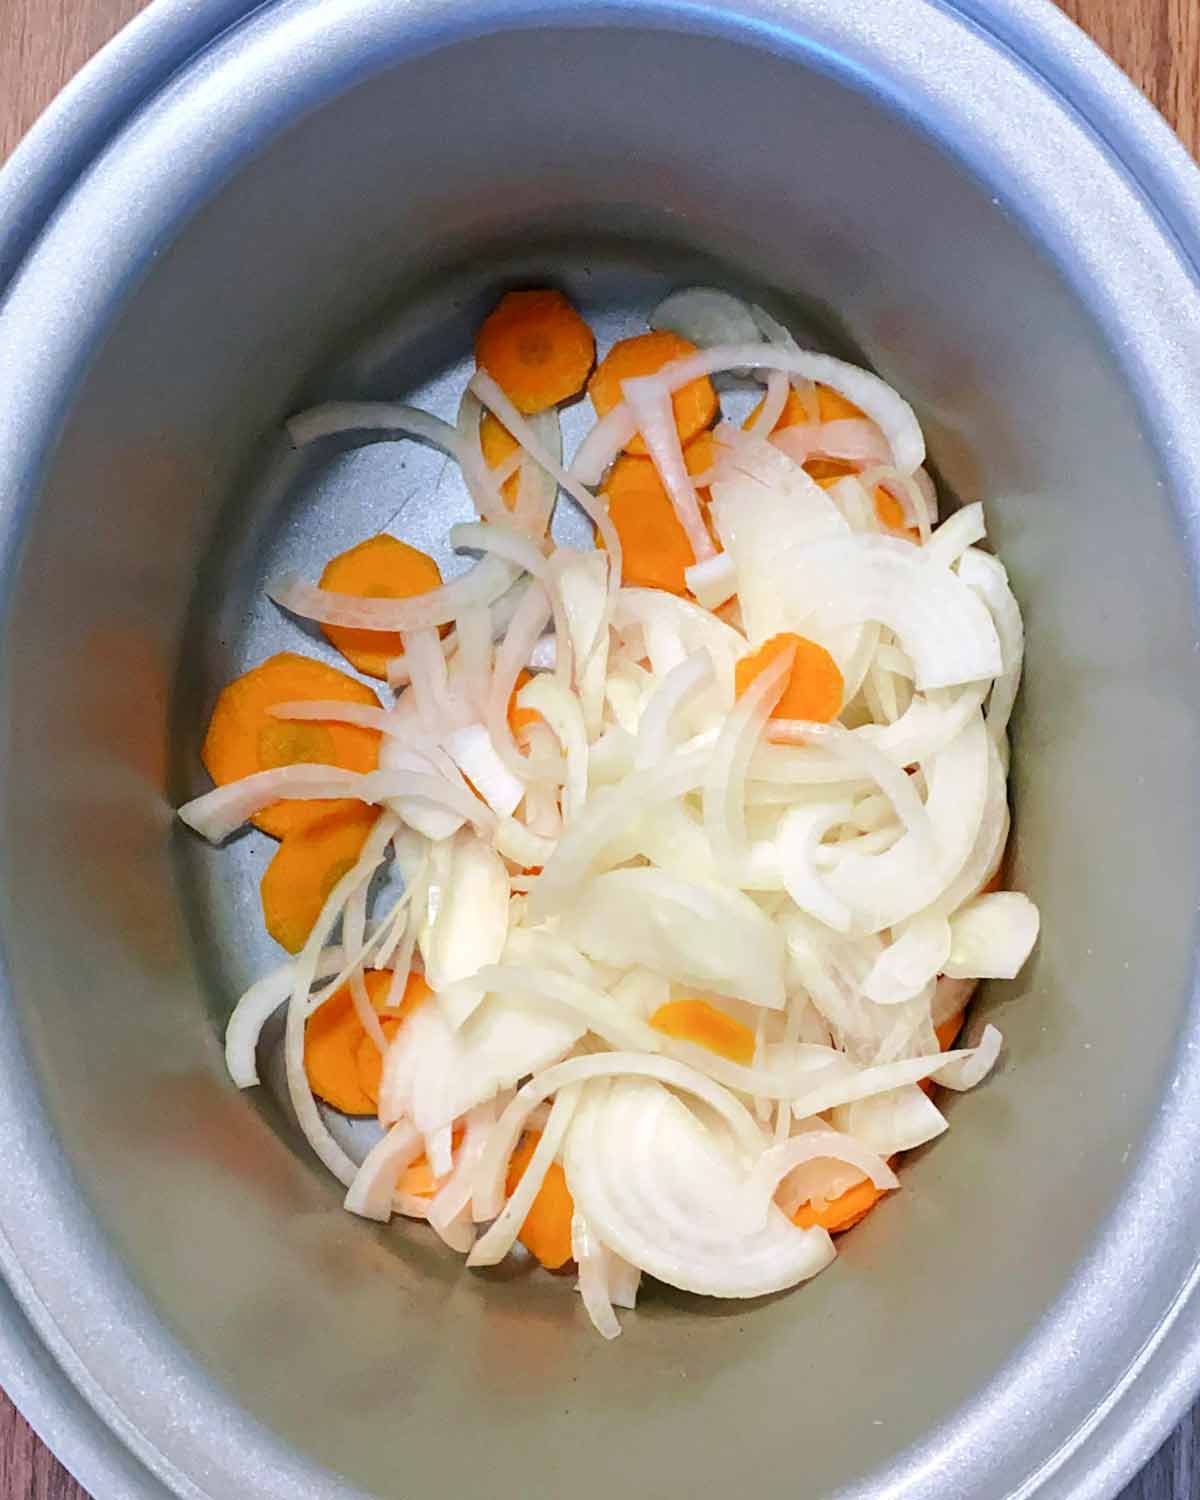 Chopped onion and carrot in a slow cooker bowl.